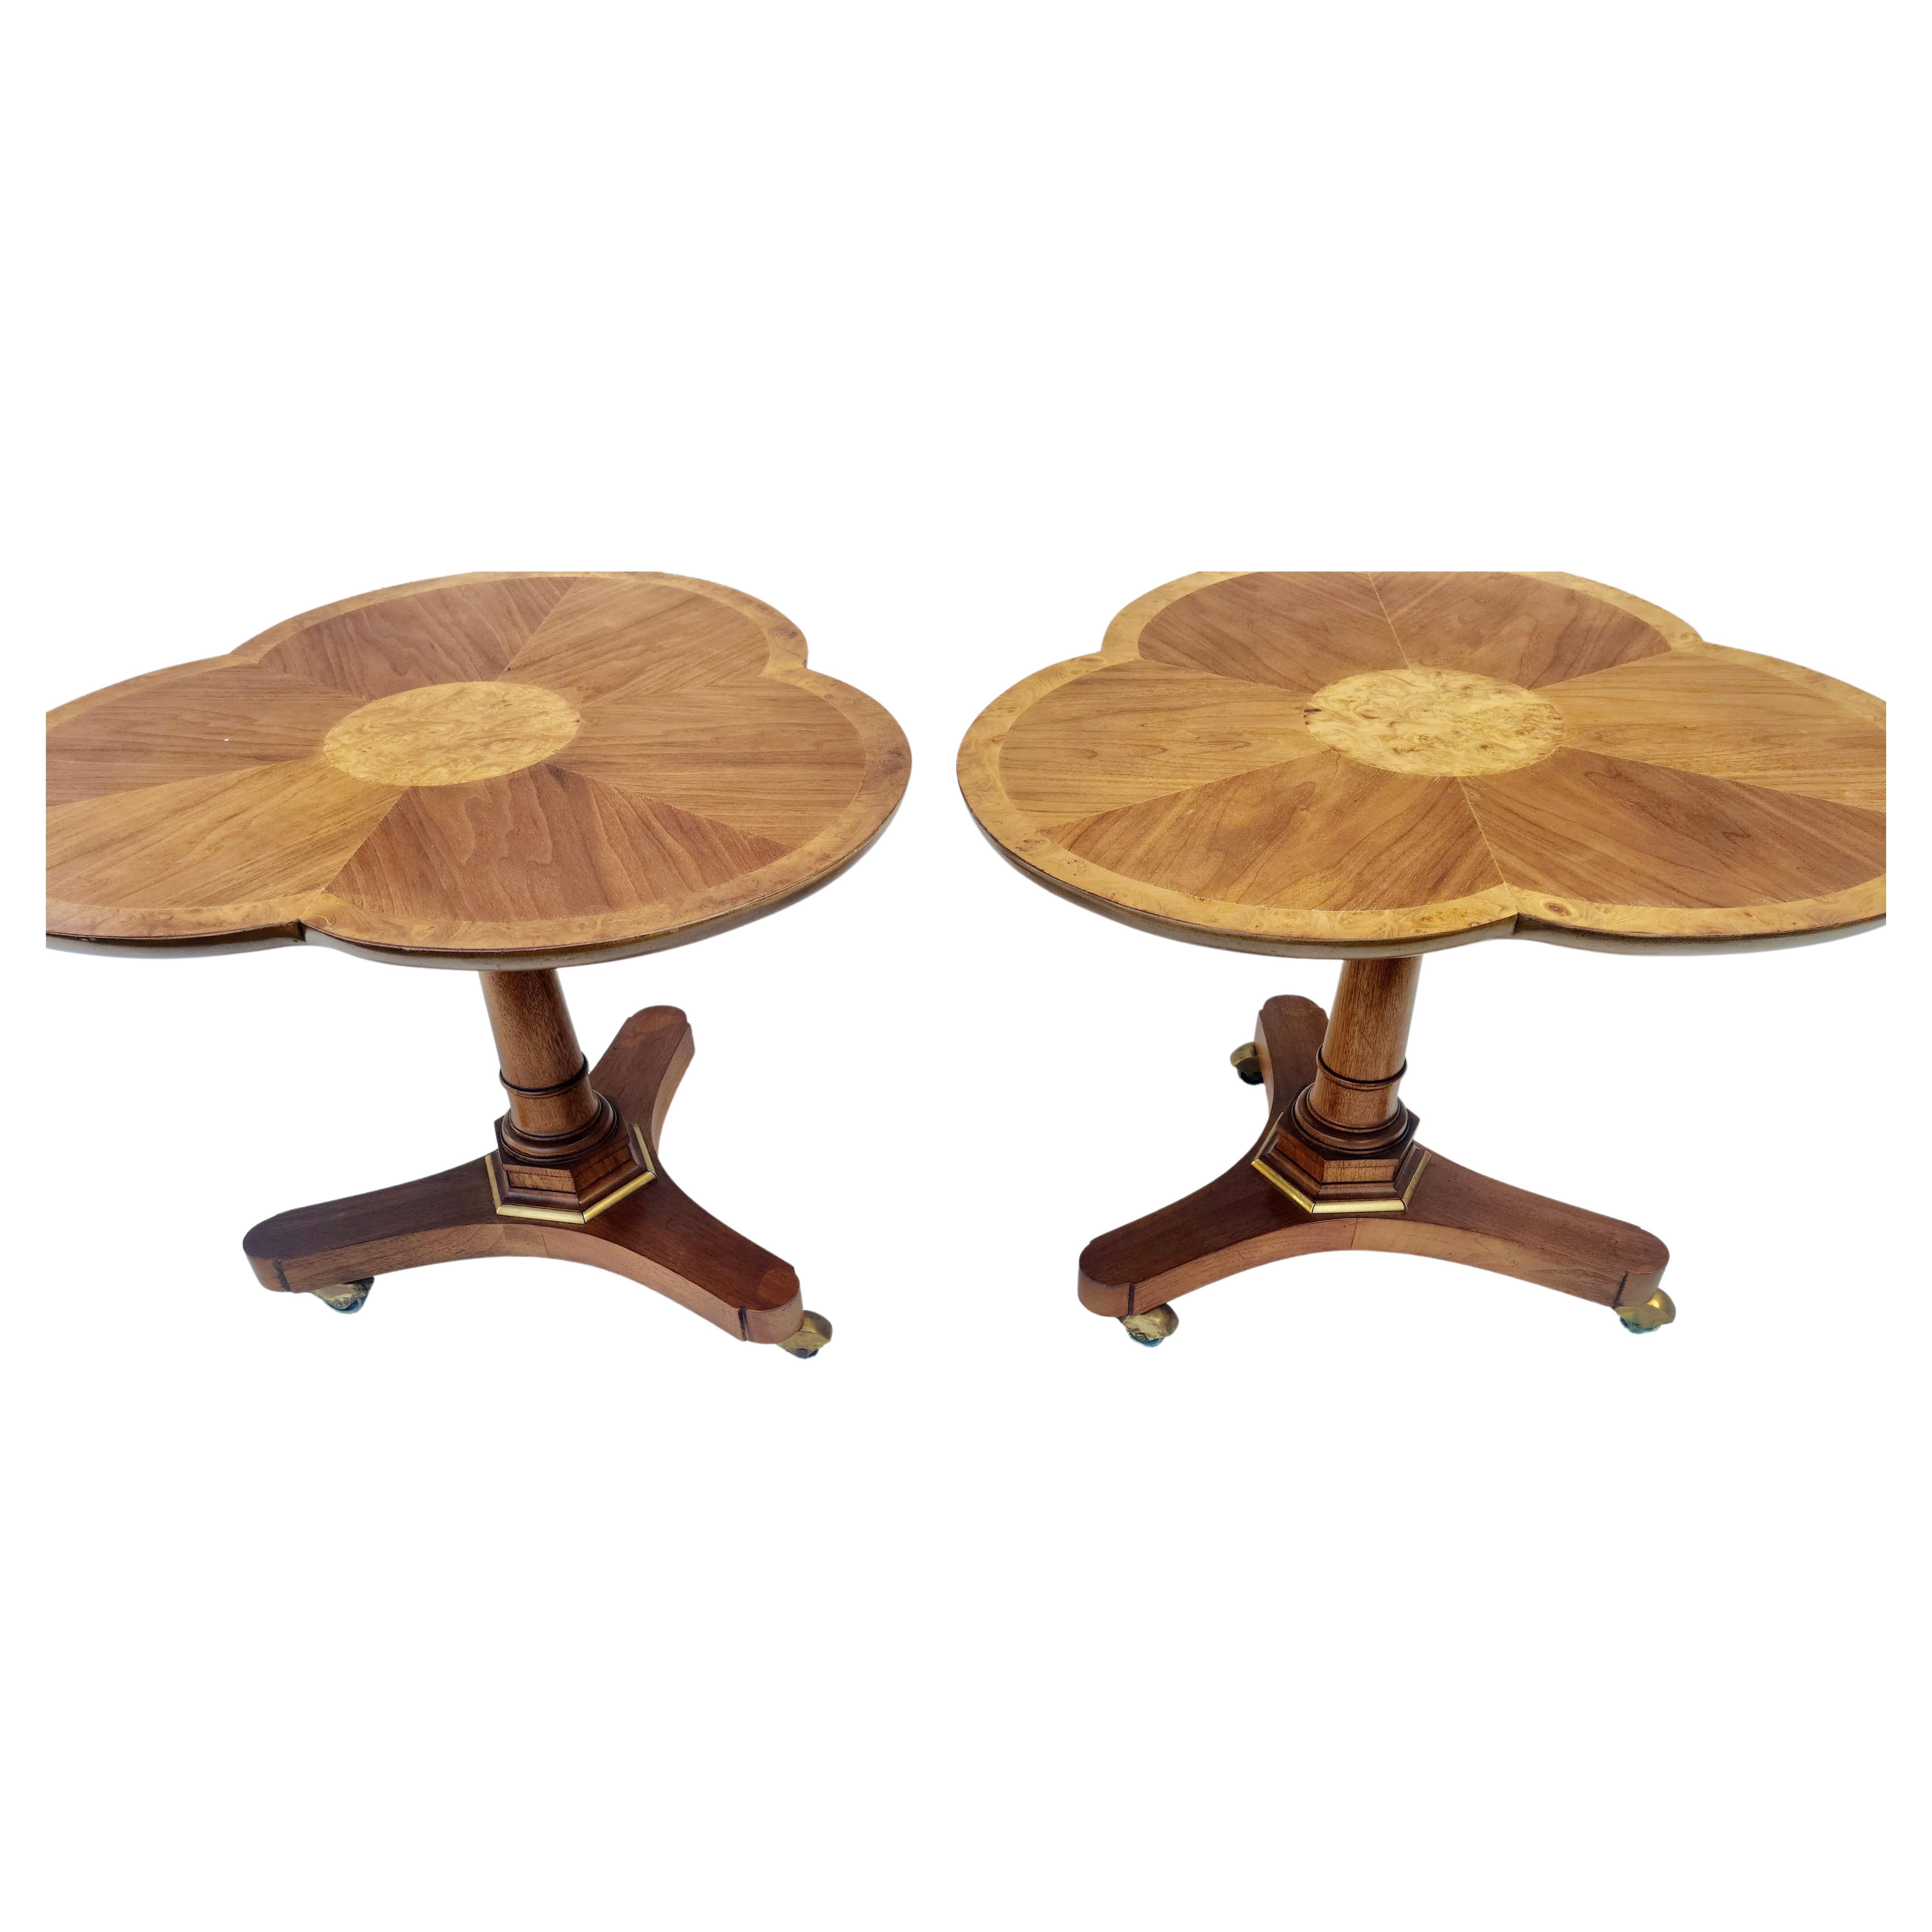 Mid-20th Century Pair Pansy Flower Gueridon Tables Walnut & Burl in the Style of Baker Furniture For Sale